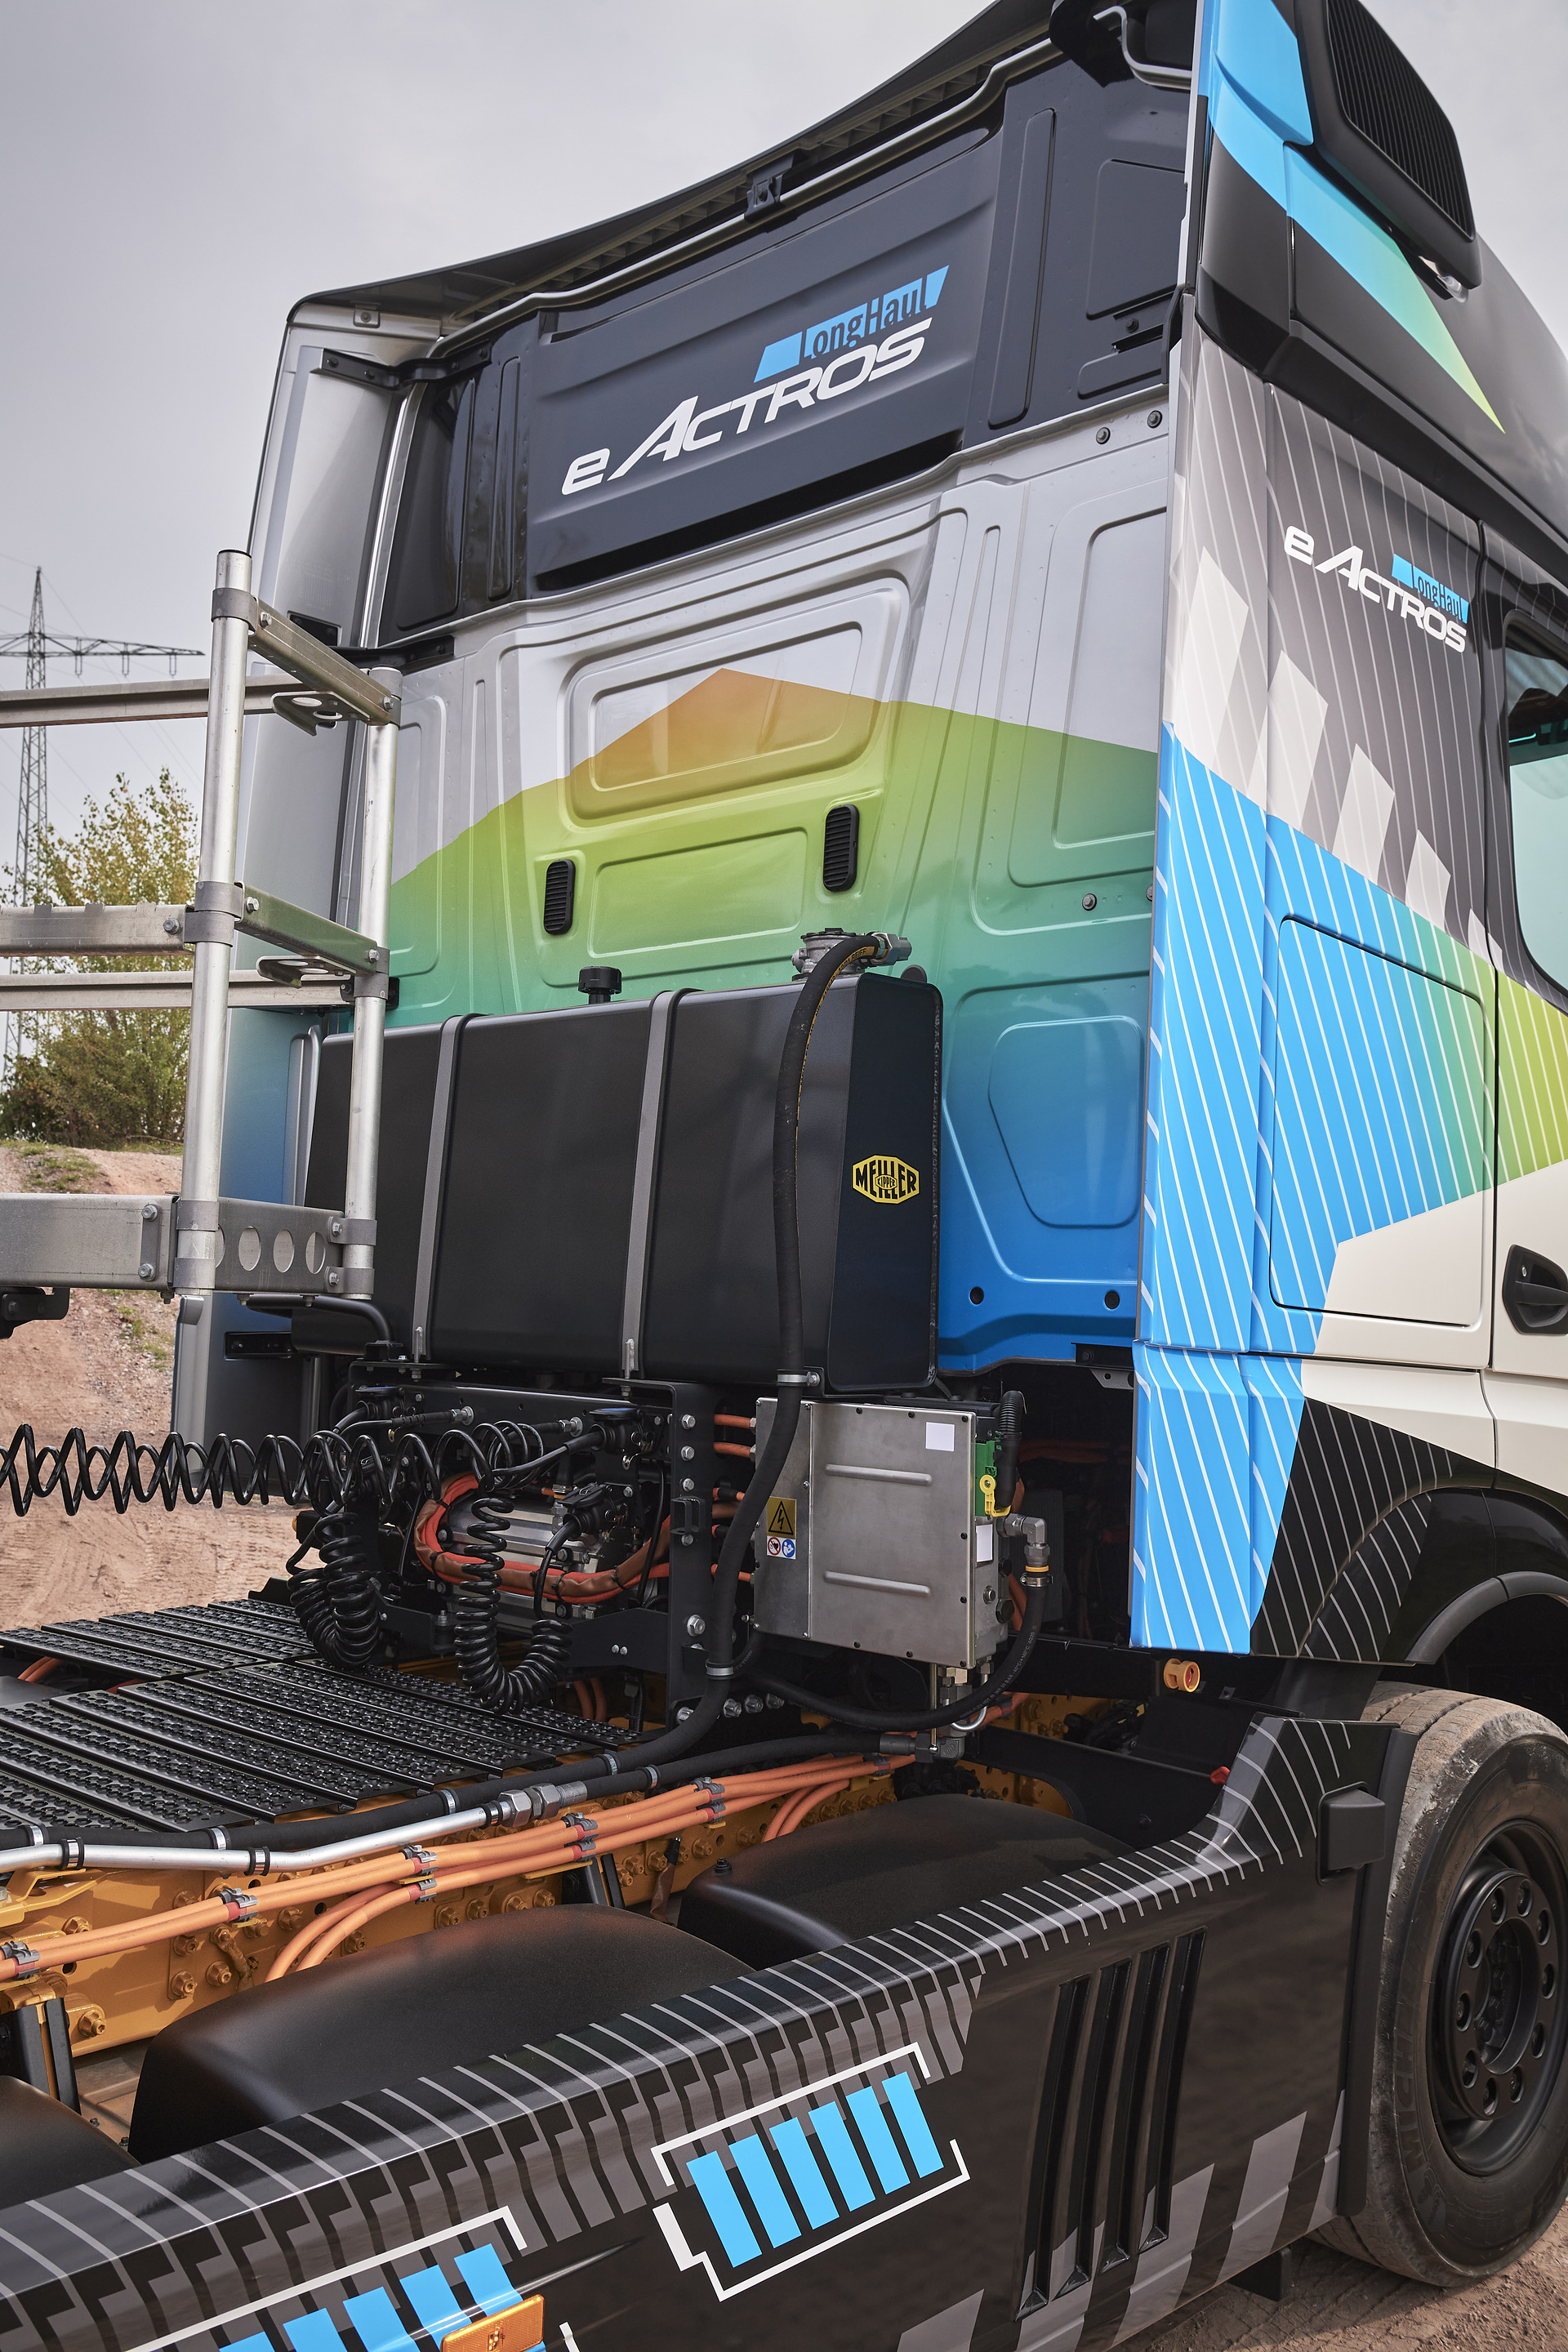 Construction site traffic goes electric: Mercedes-Benz Trucks to present tailor-made, low-noise and locally CO2-neutral vehicle solutions at bauma 2022